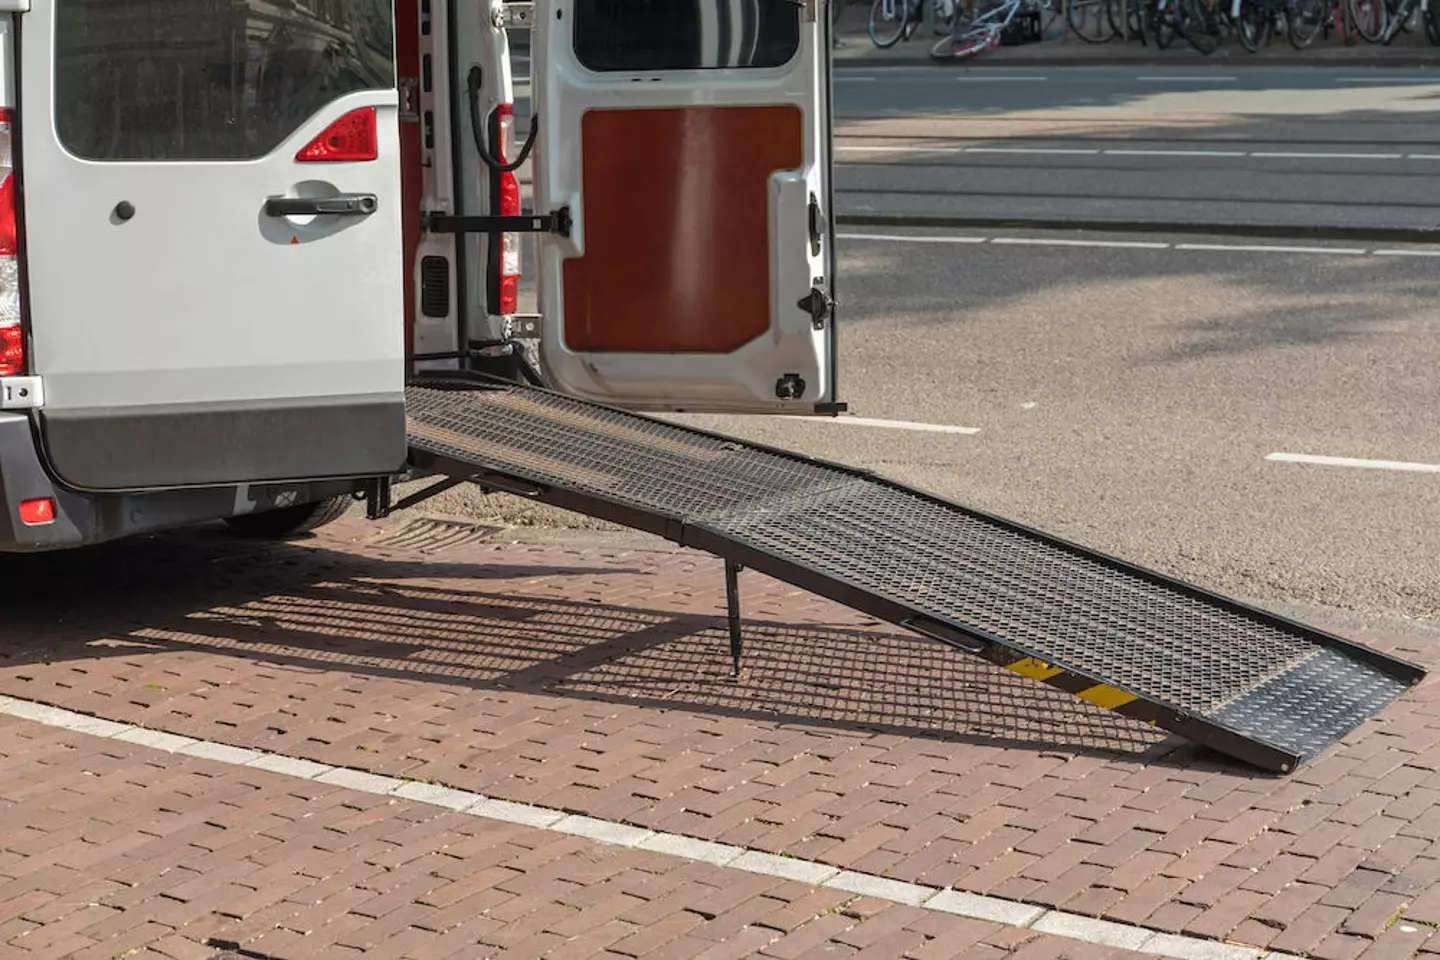 Vans may be fitted with ramps for wheelchair users.